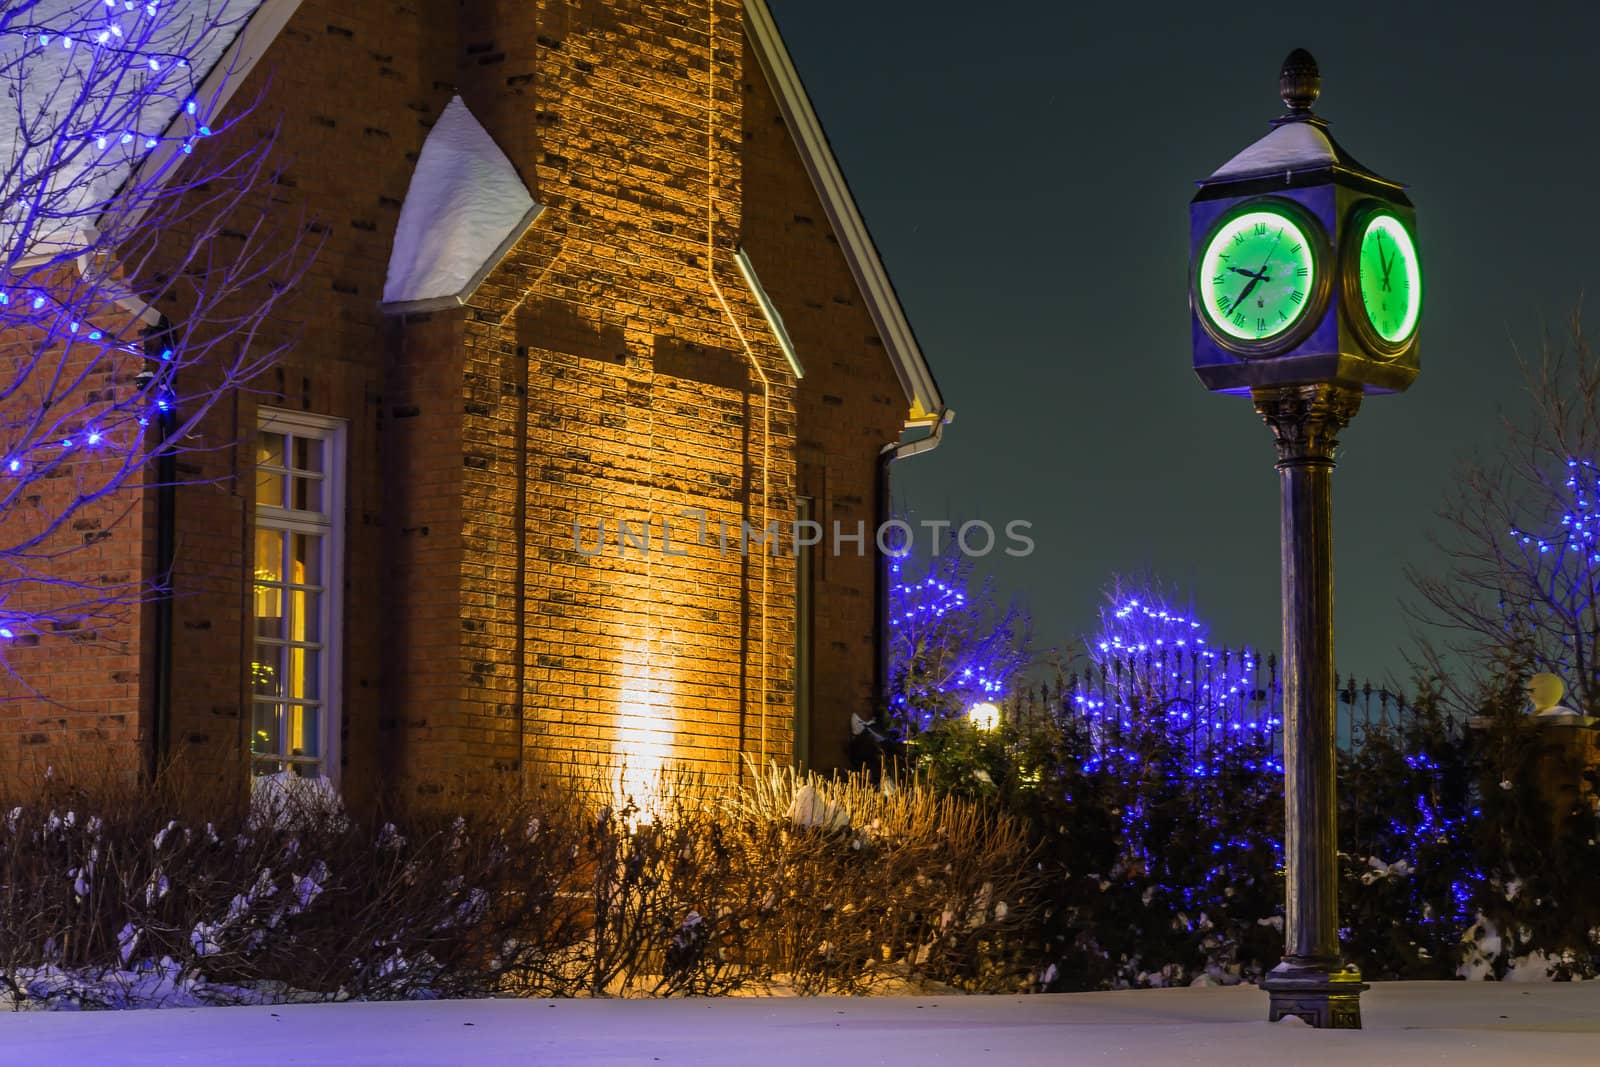 A beautiful old style green clock in the street in front of a big house in a cold winter night in Quebec, Canada